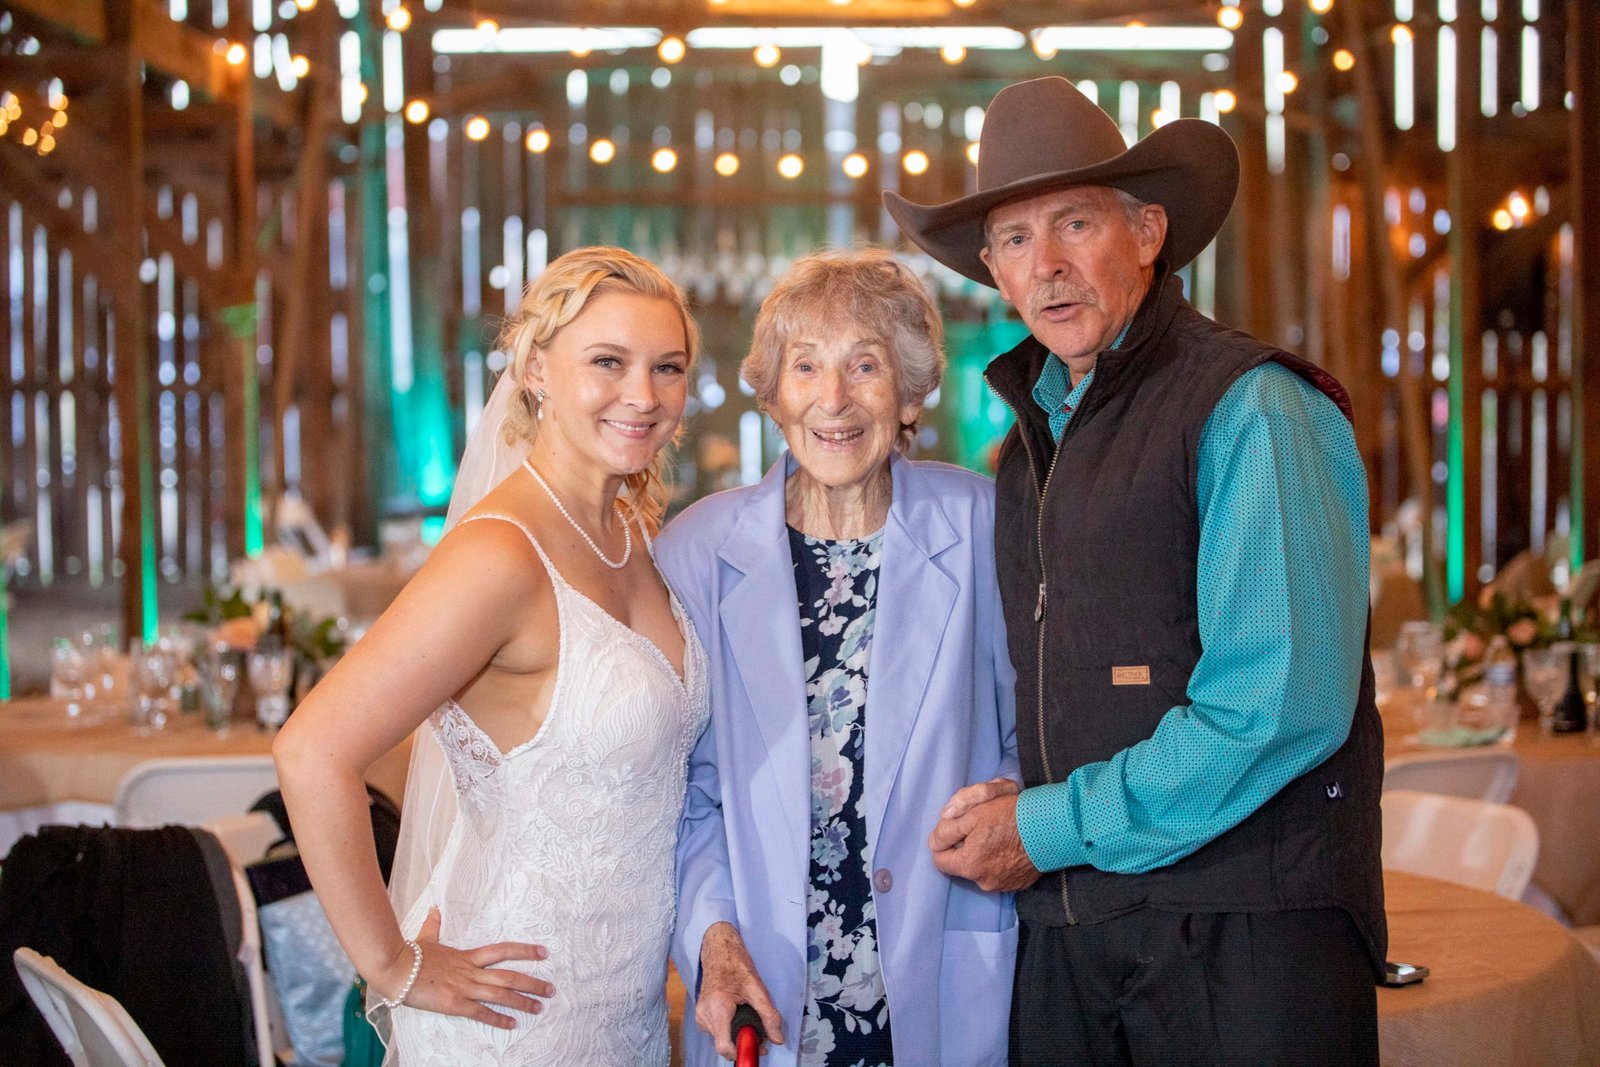 bride with her father and grandma during the wedding reception